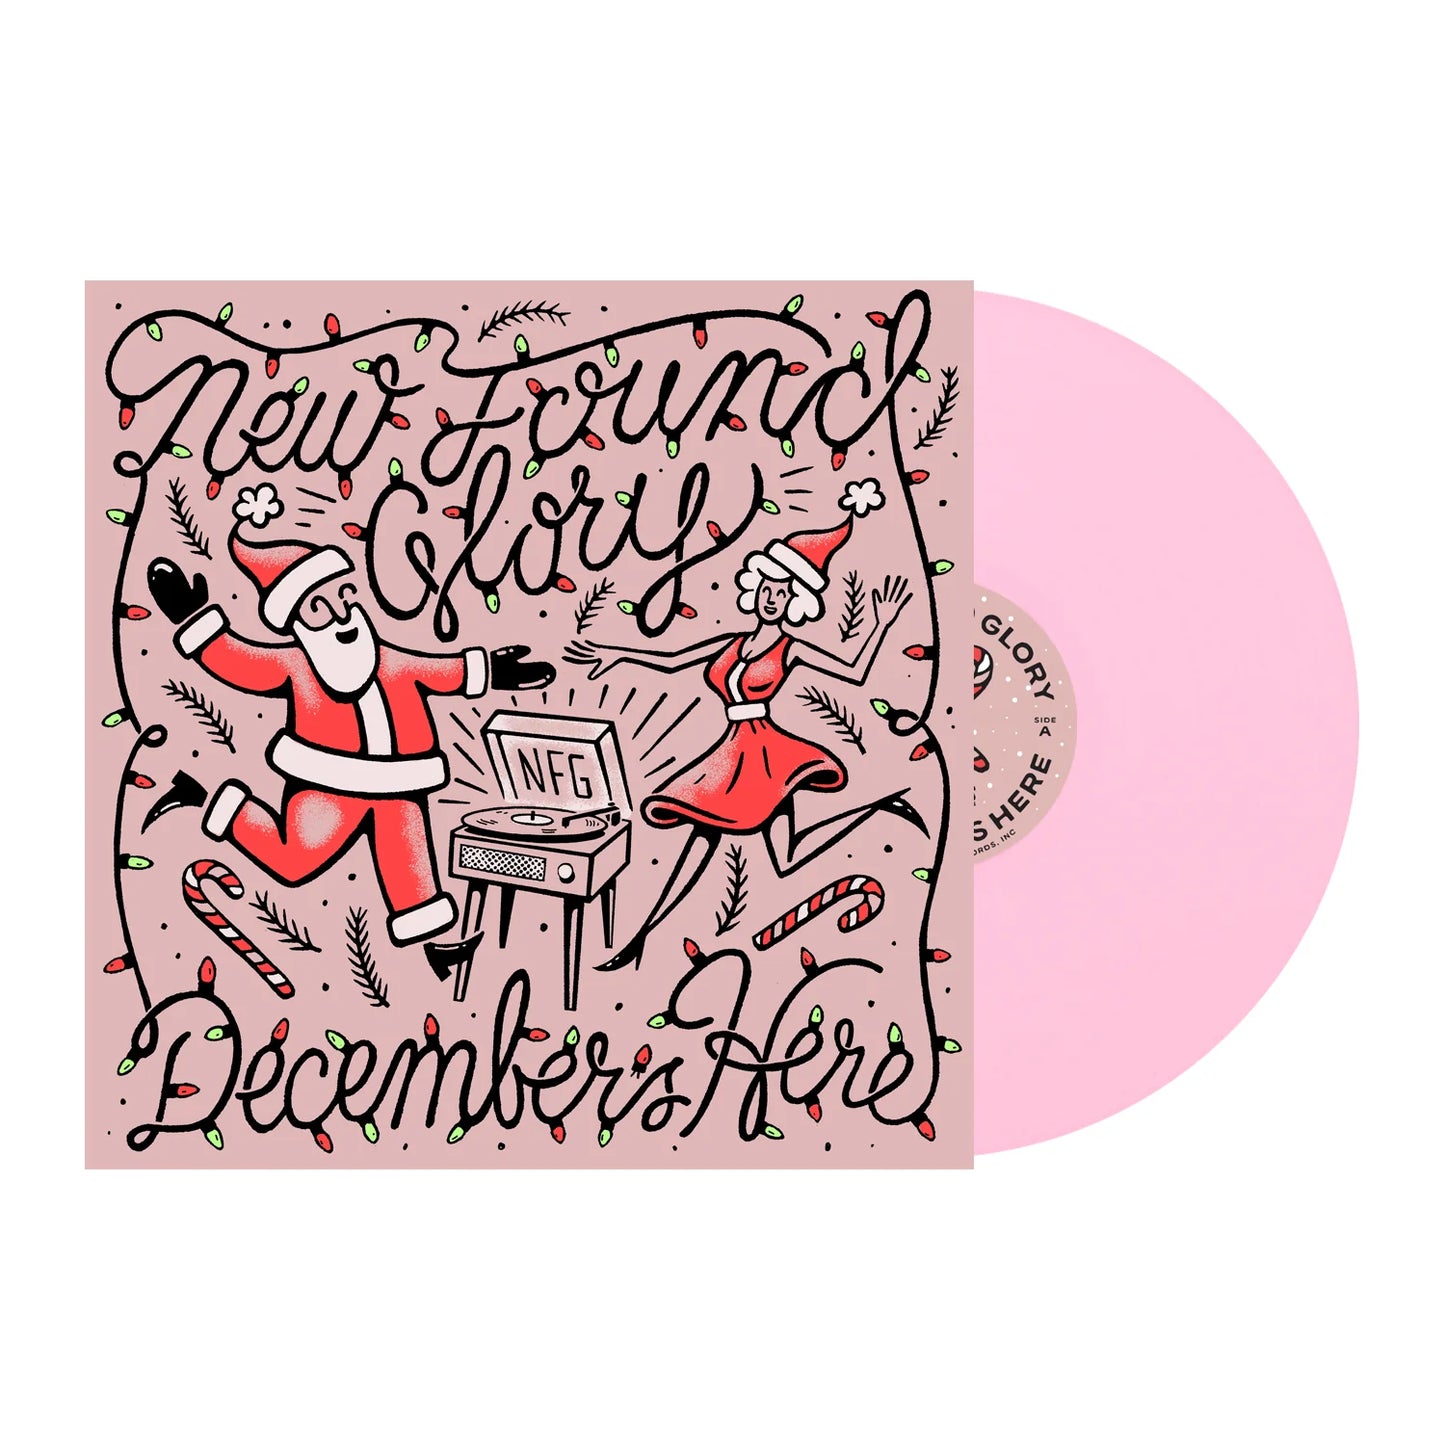 New Found Glory "December's Here" Pink Variant Color Vinyl LP Record